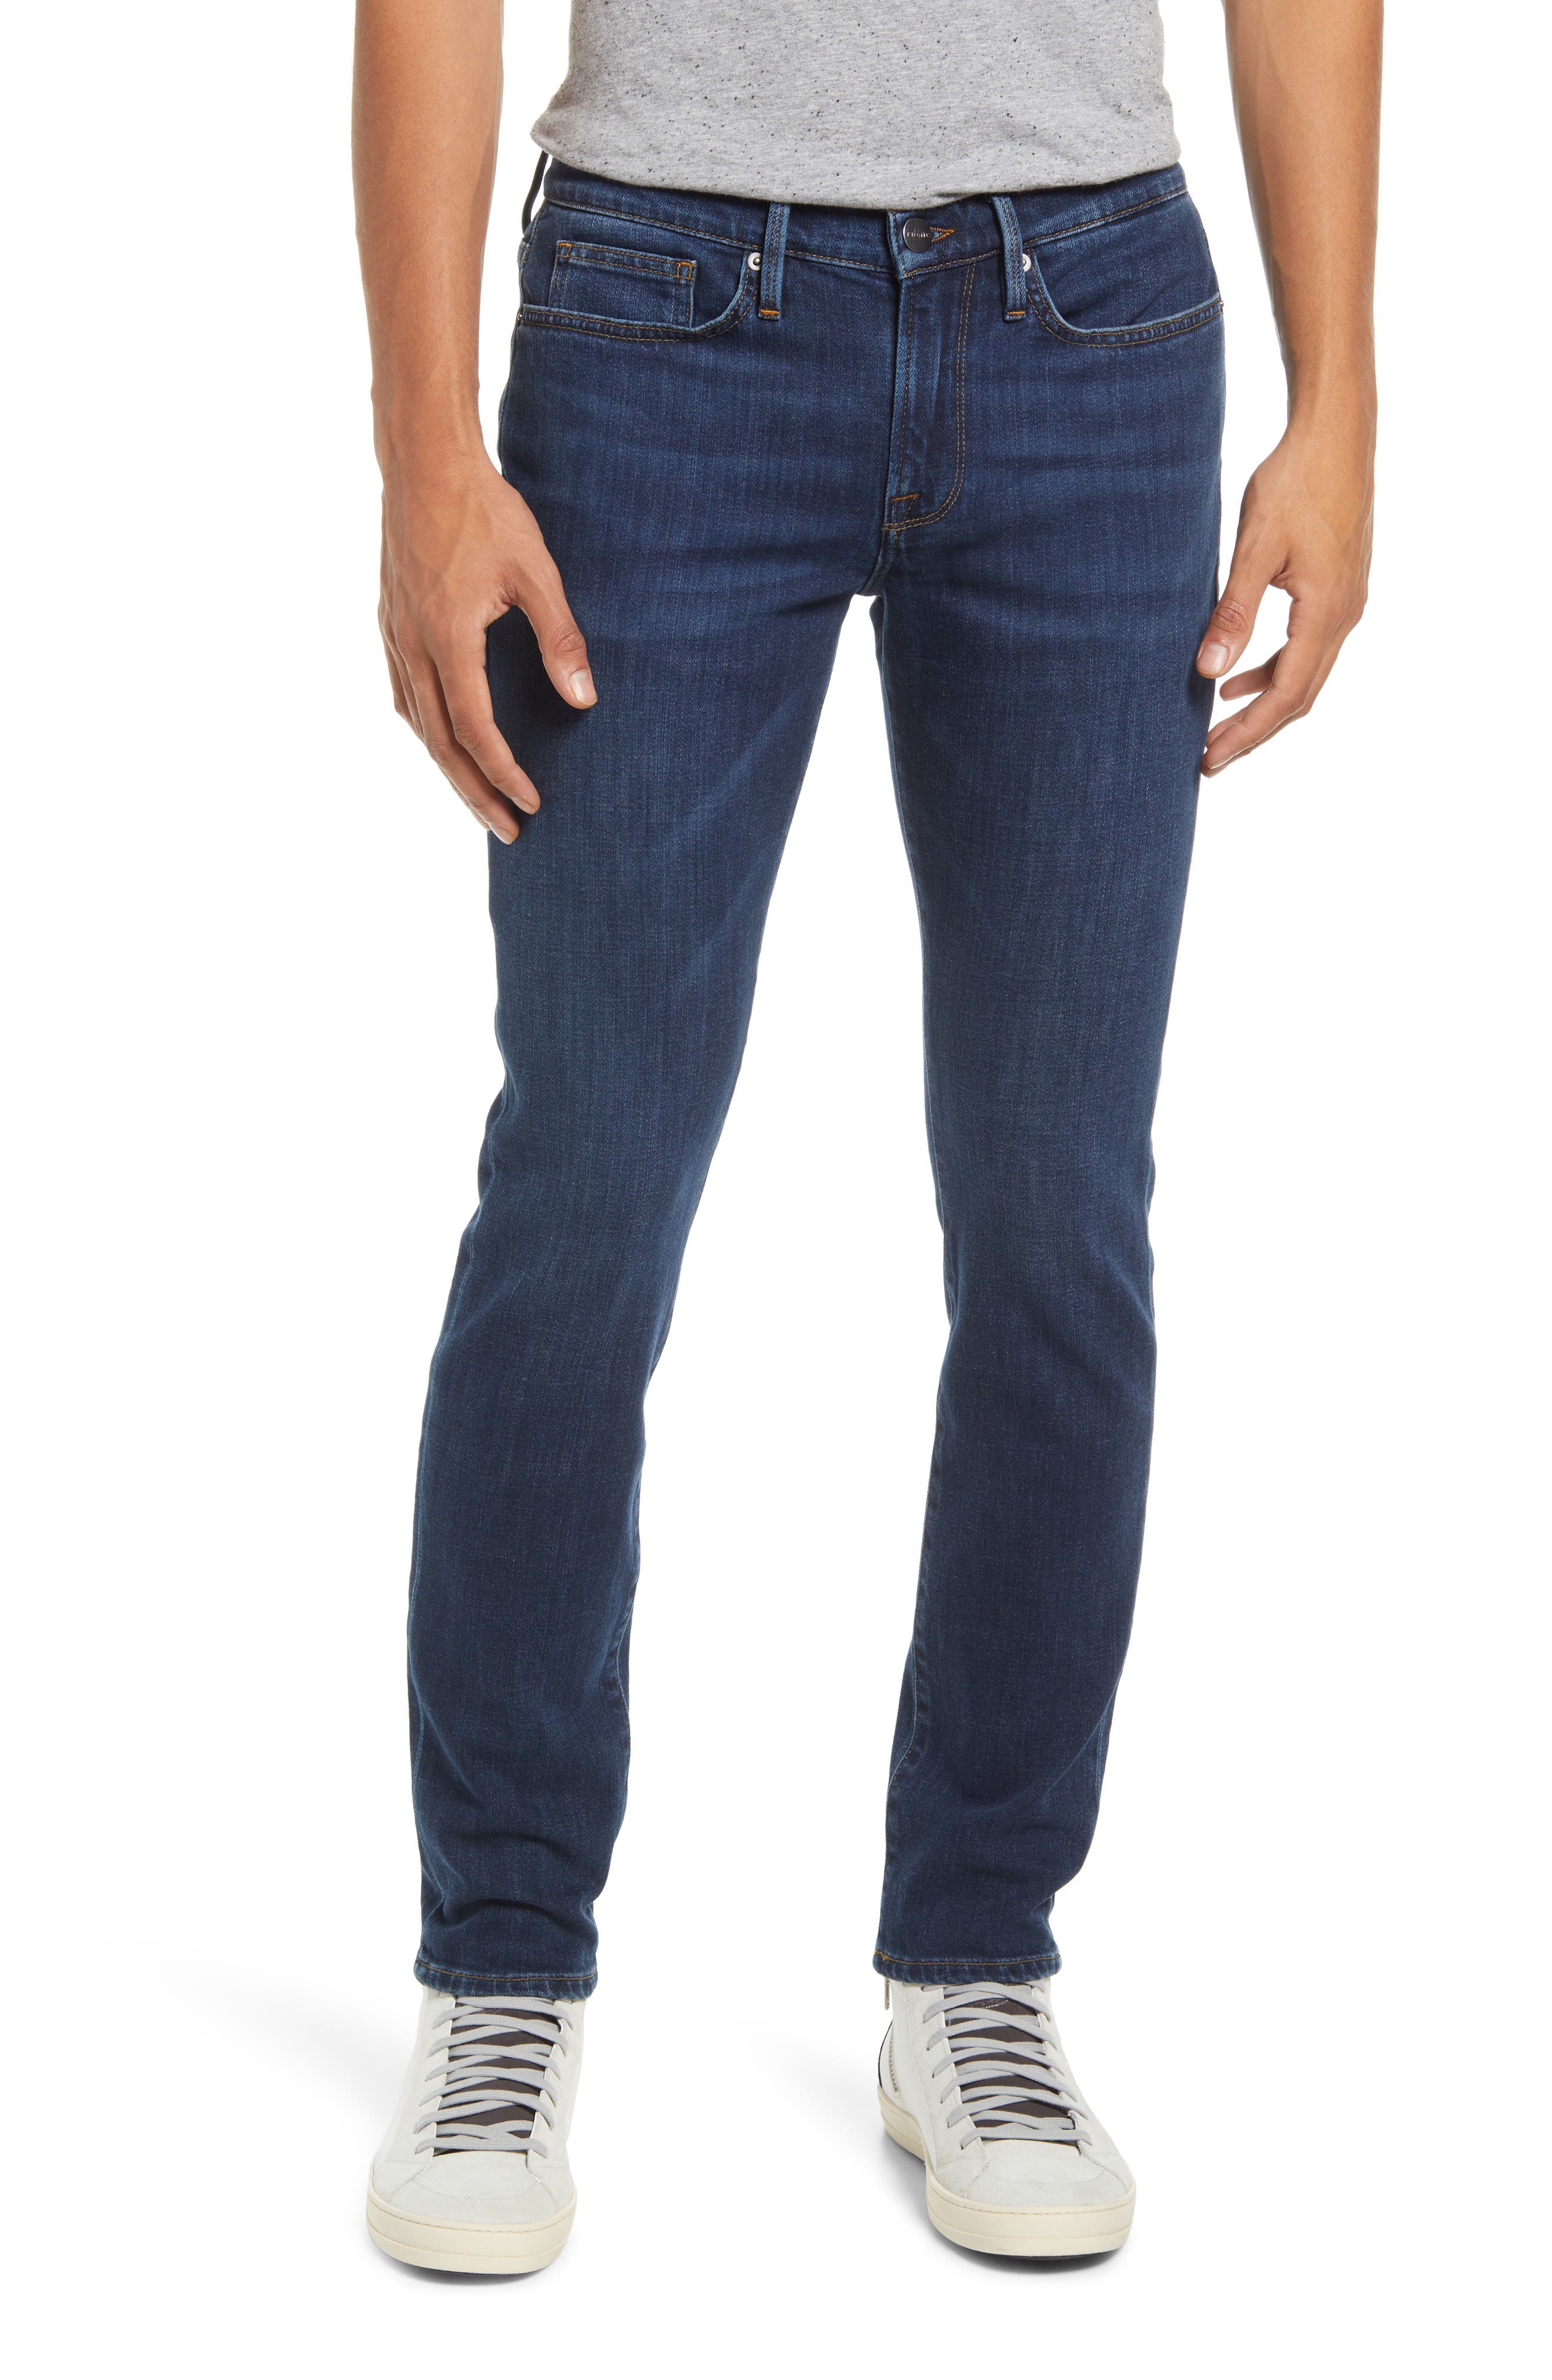 FRAME L'Homme Men's Ripped Skinny Fit Jeans in Blue Fin